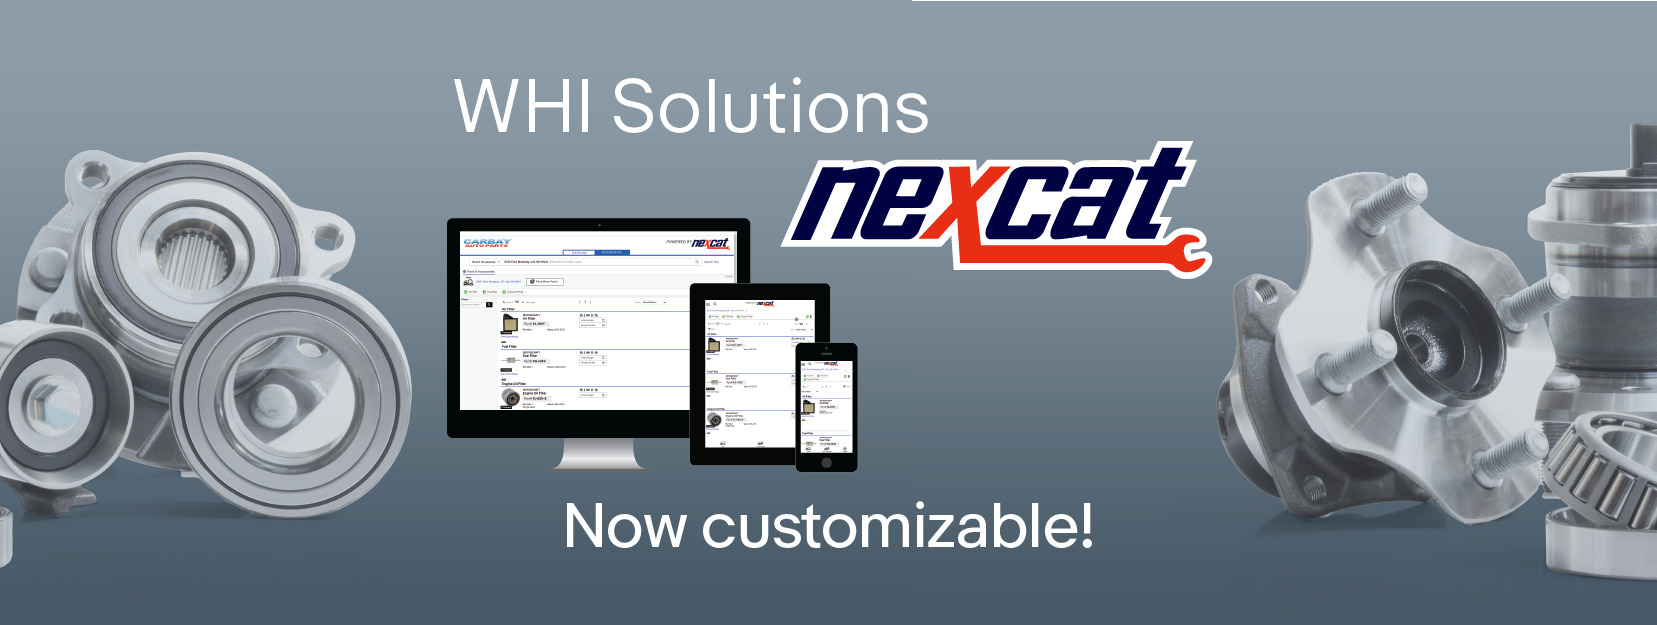 WHI Solutions